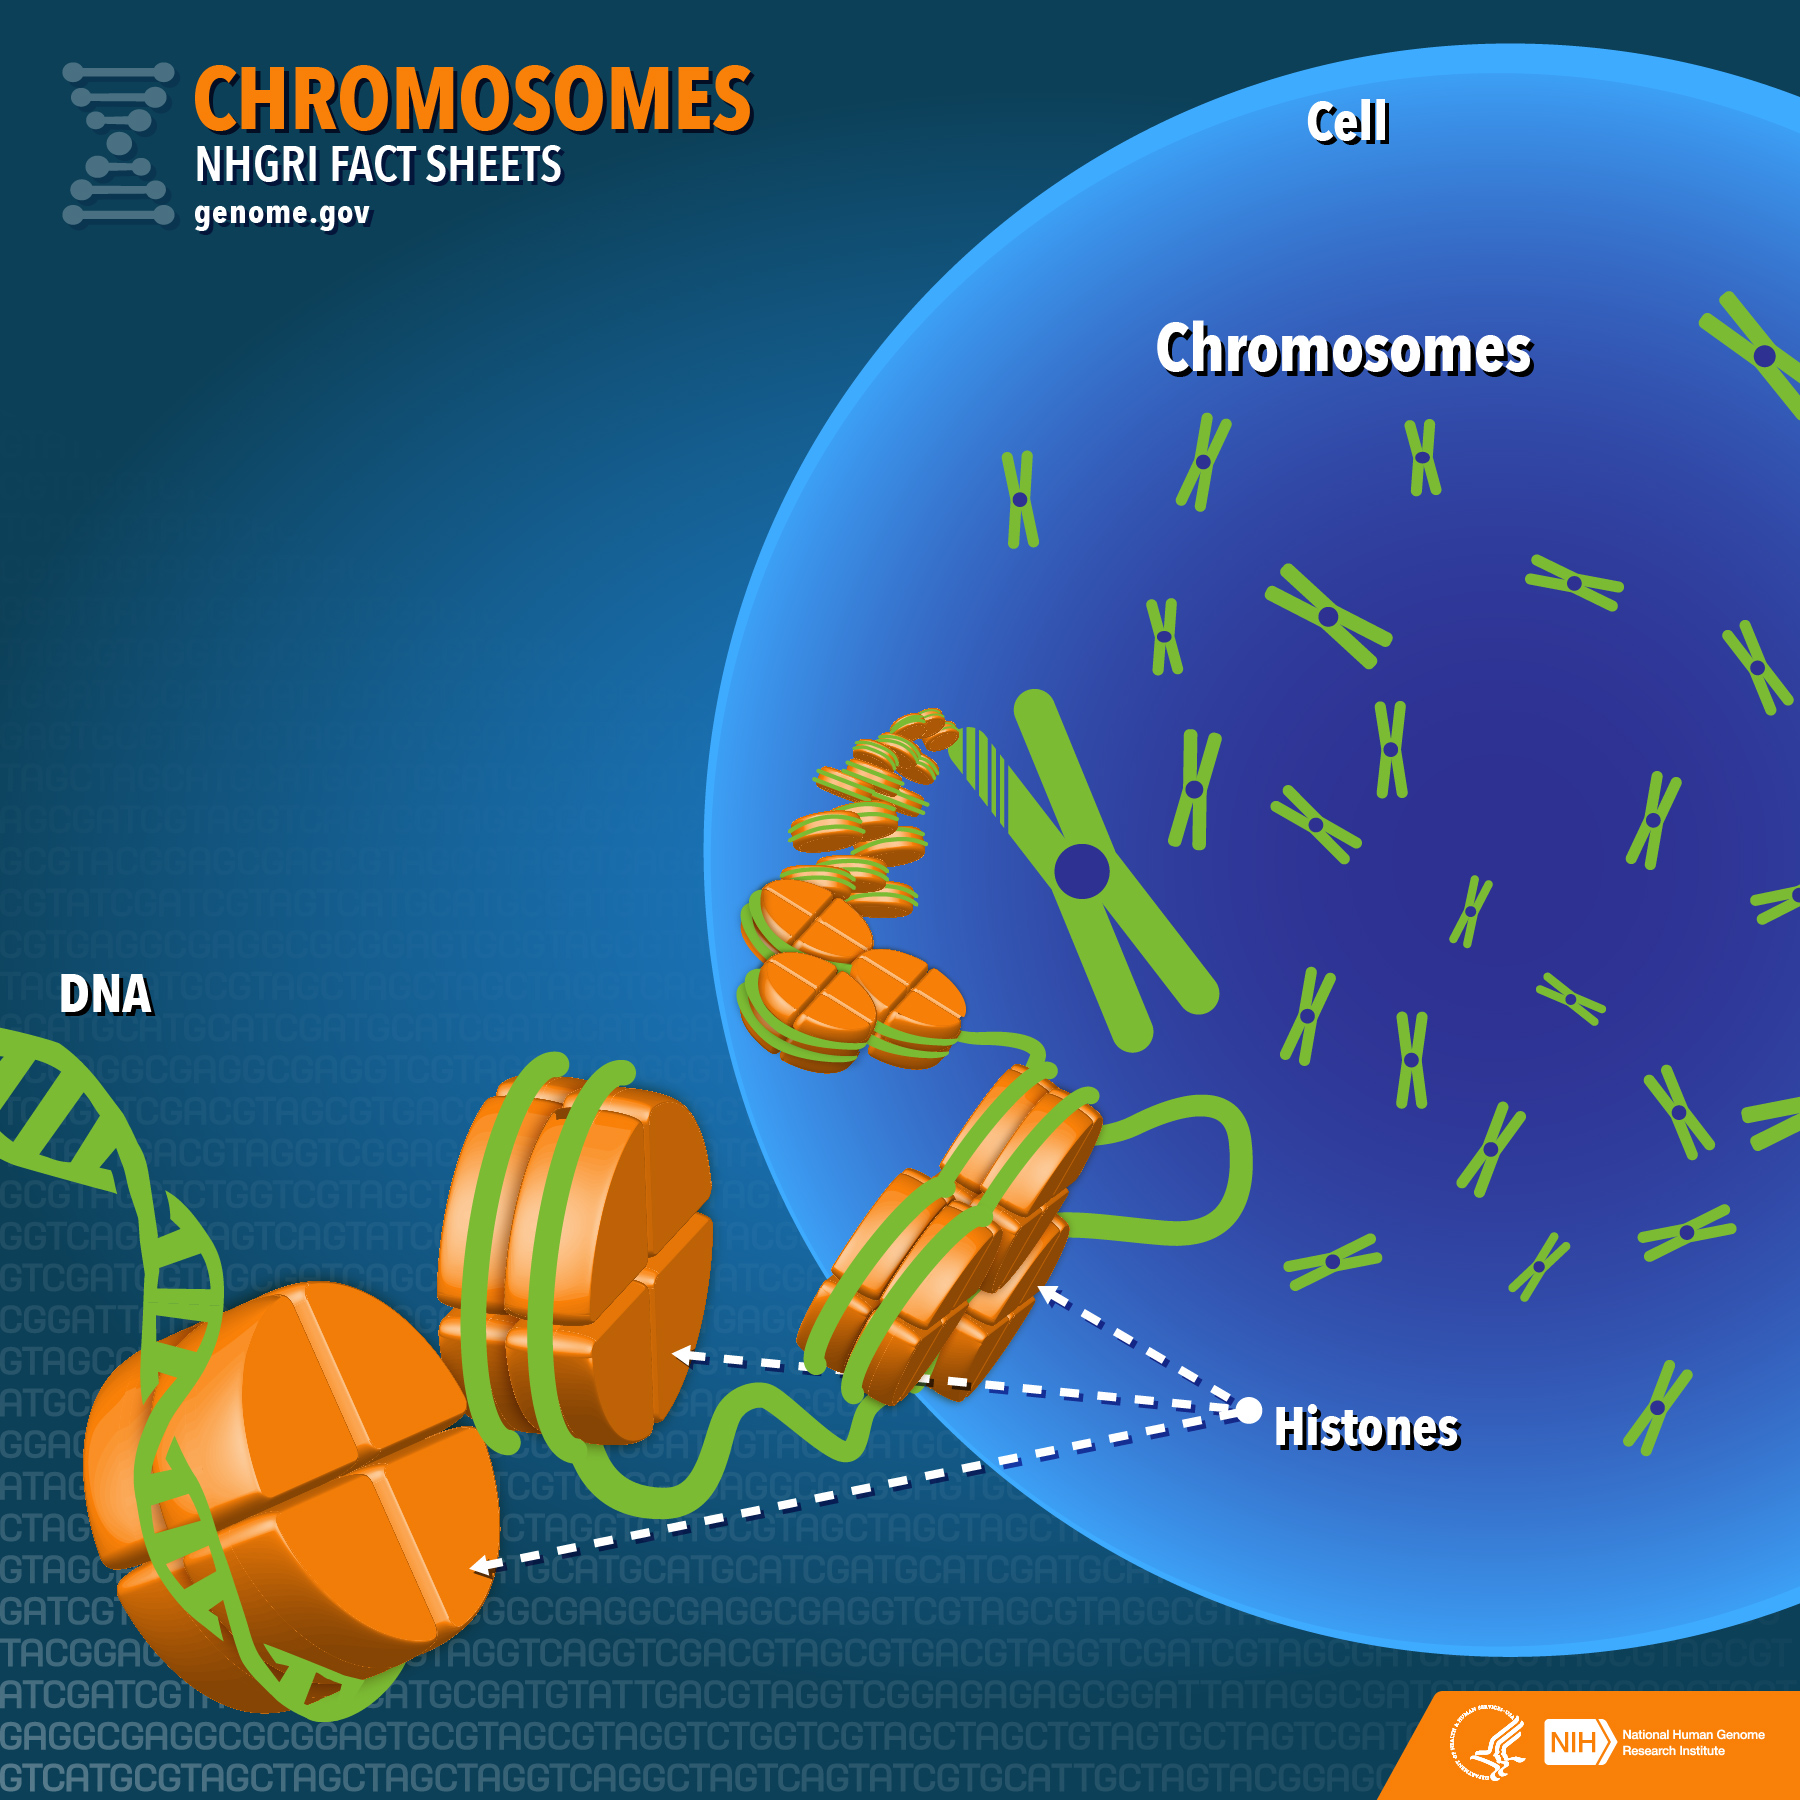 what chromosome is SCIDS on